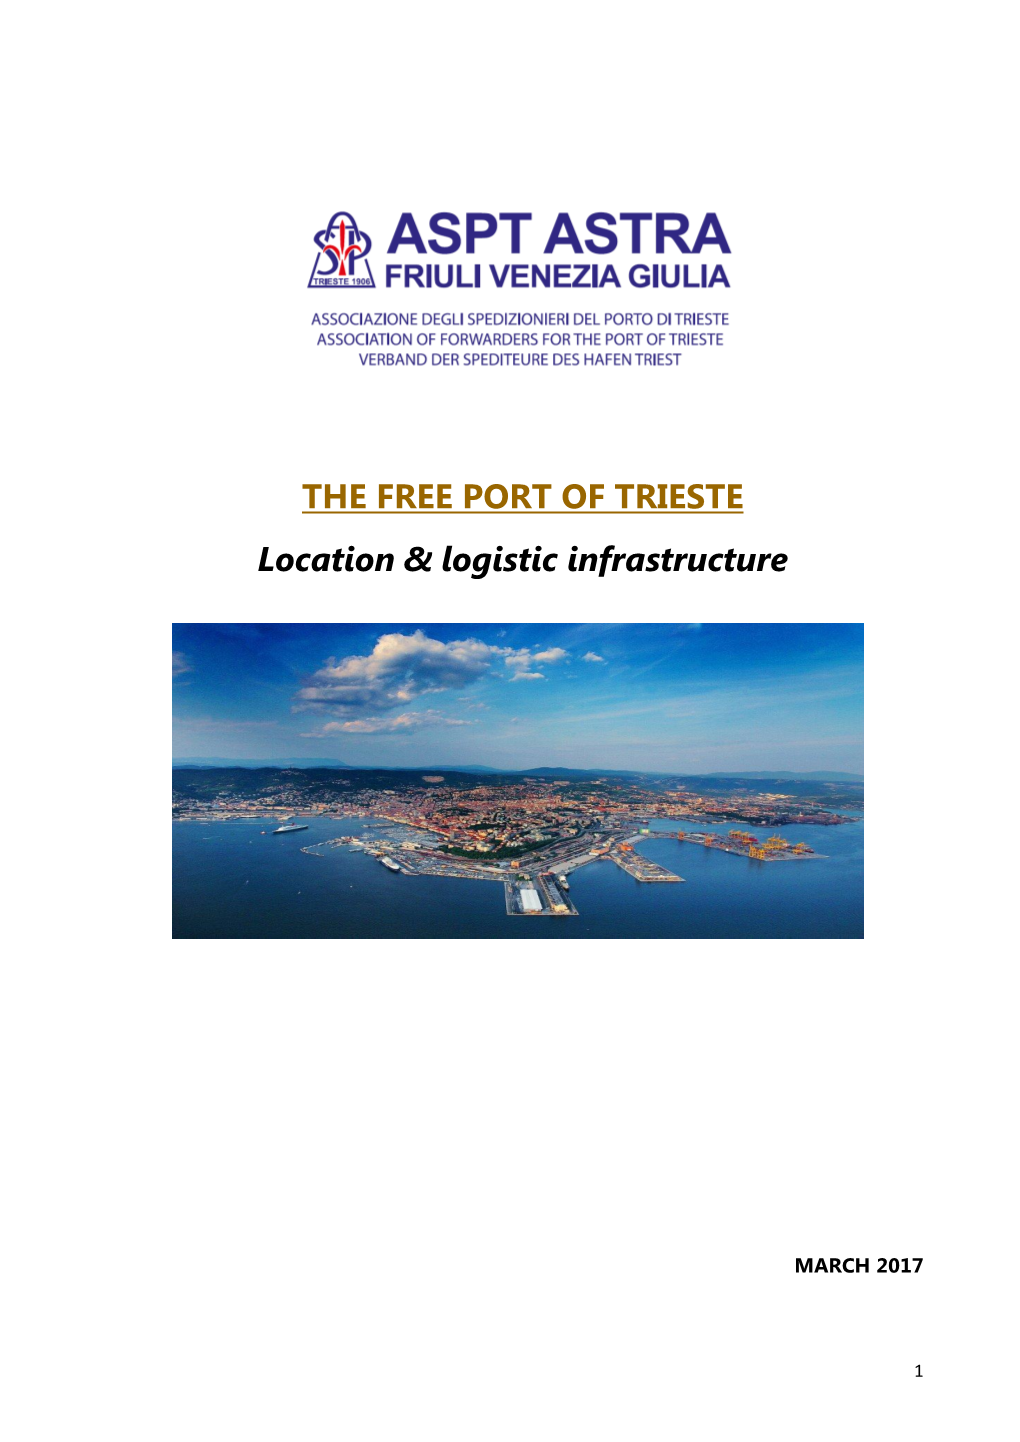 THE FREE PORT of TRIESTE Location & Logistic Infrastructure